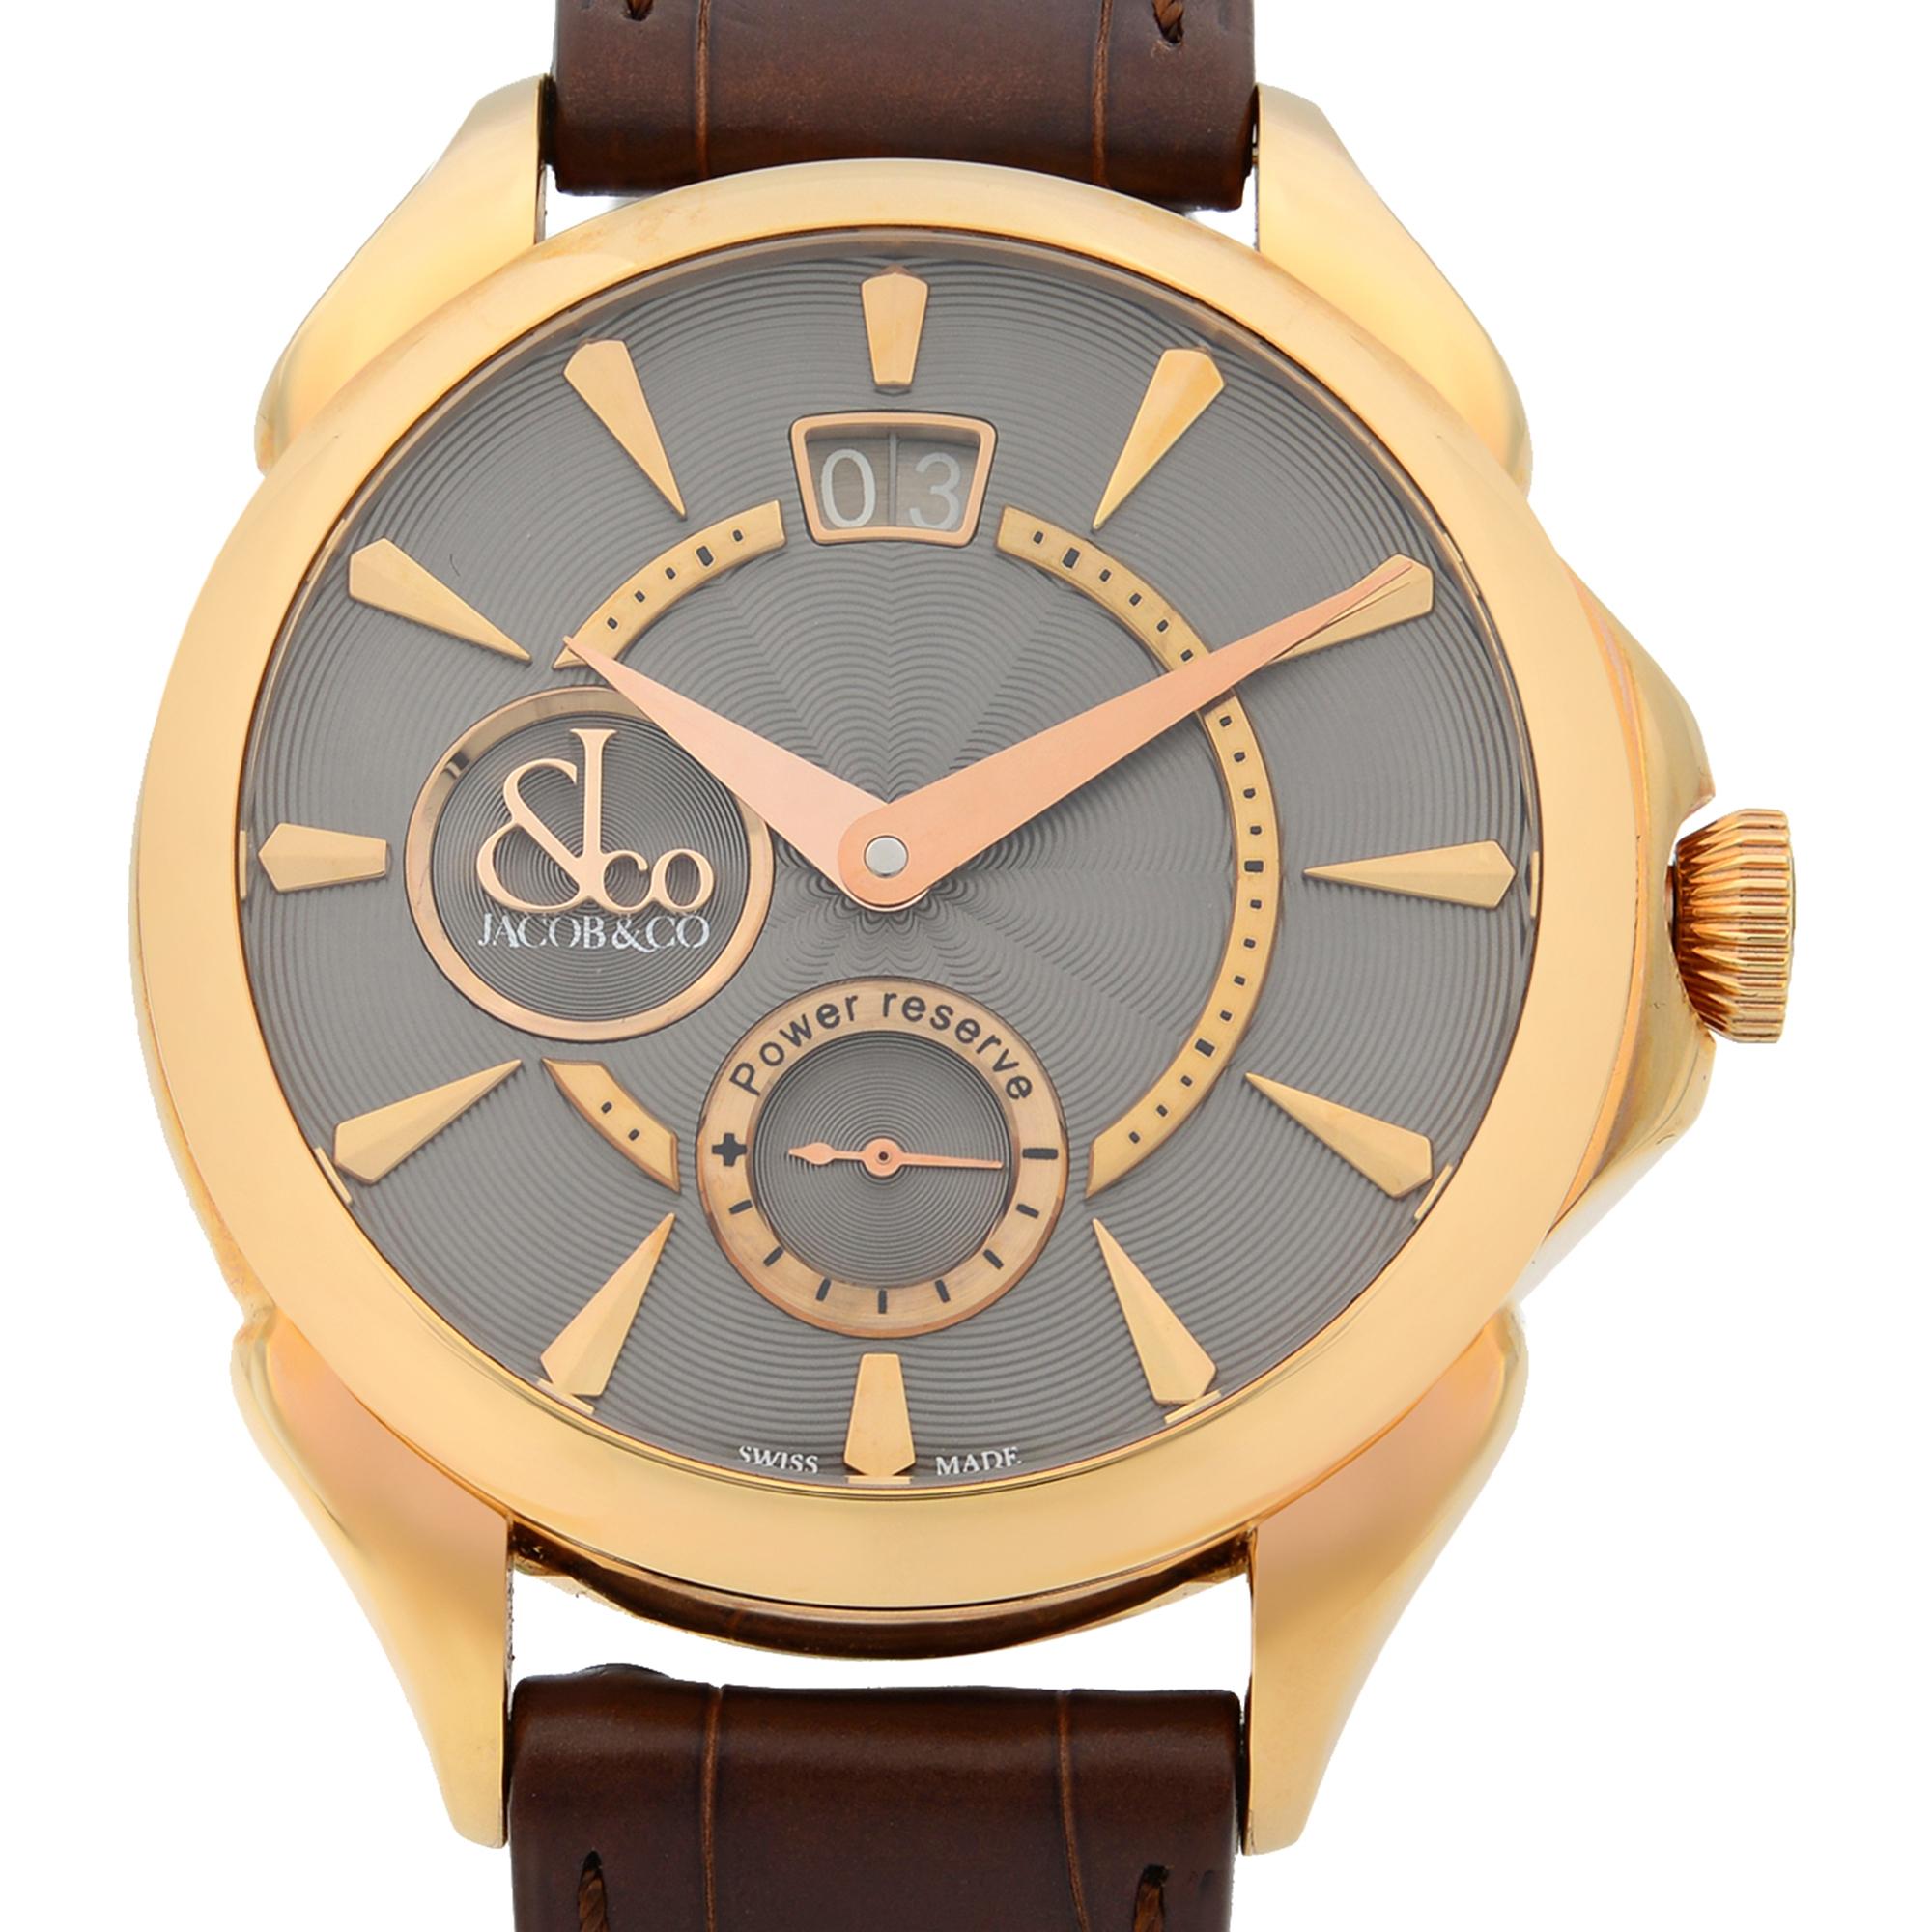 This pre-owned Jacob & Co Palatial  PC400.40.NS.NB.A is a beautiful men's timepiece that is powered by mechanical (hand-winding) movement which is cased in a rose gold case. It has a round shape face, date indicator, power reserve indicator dial and